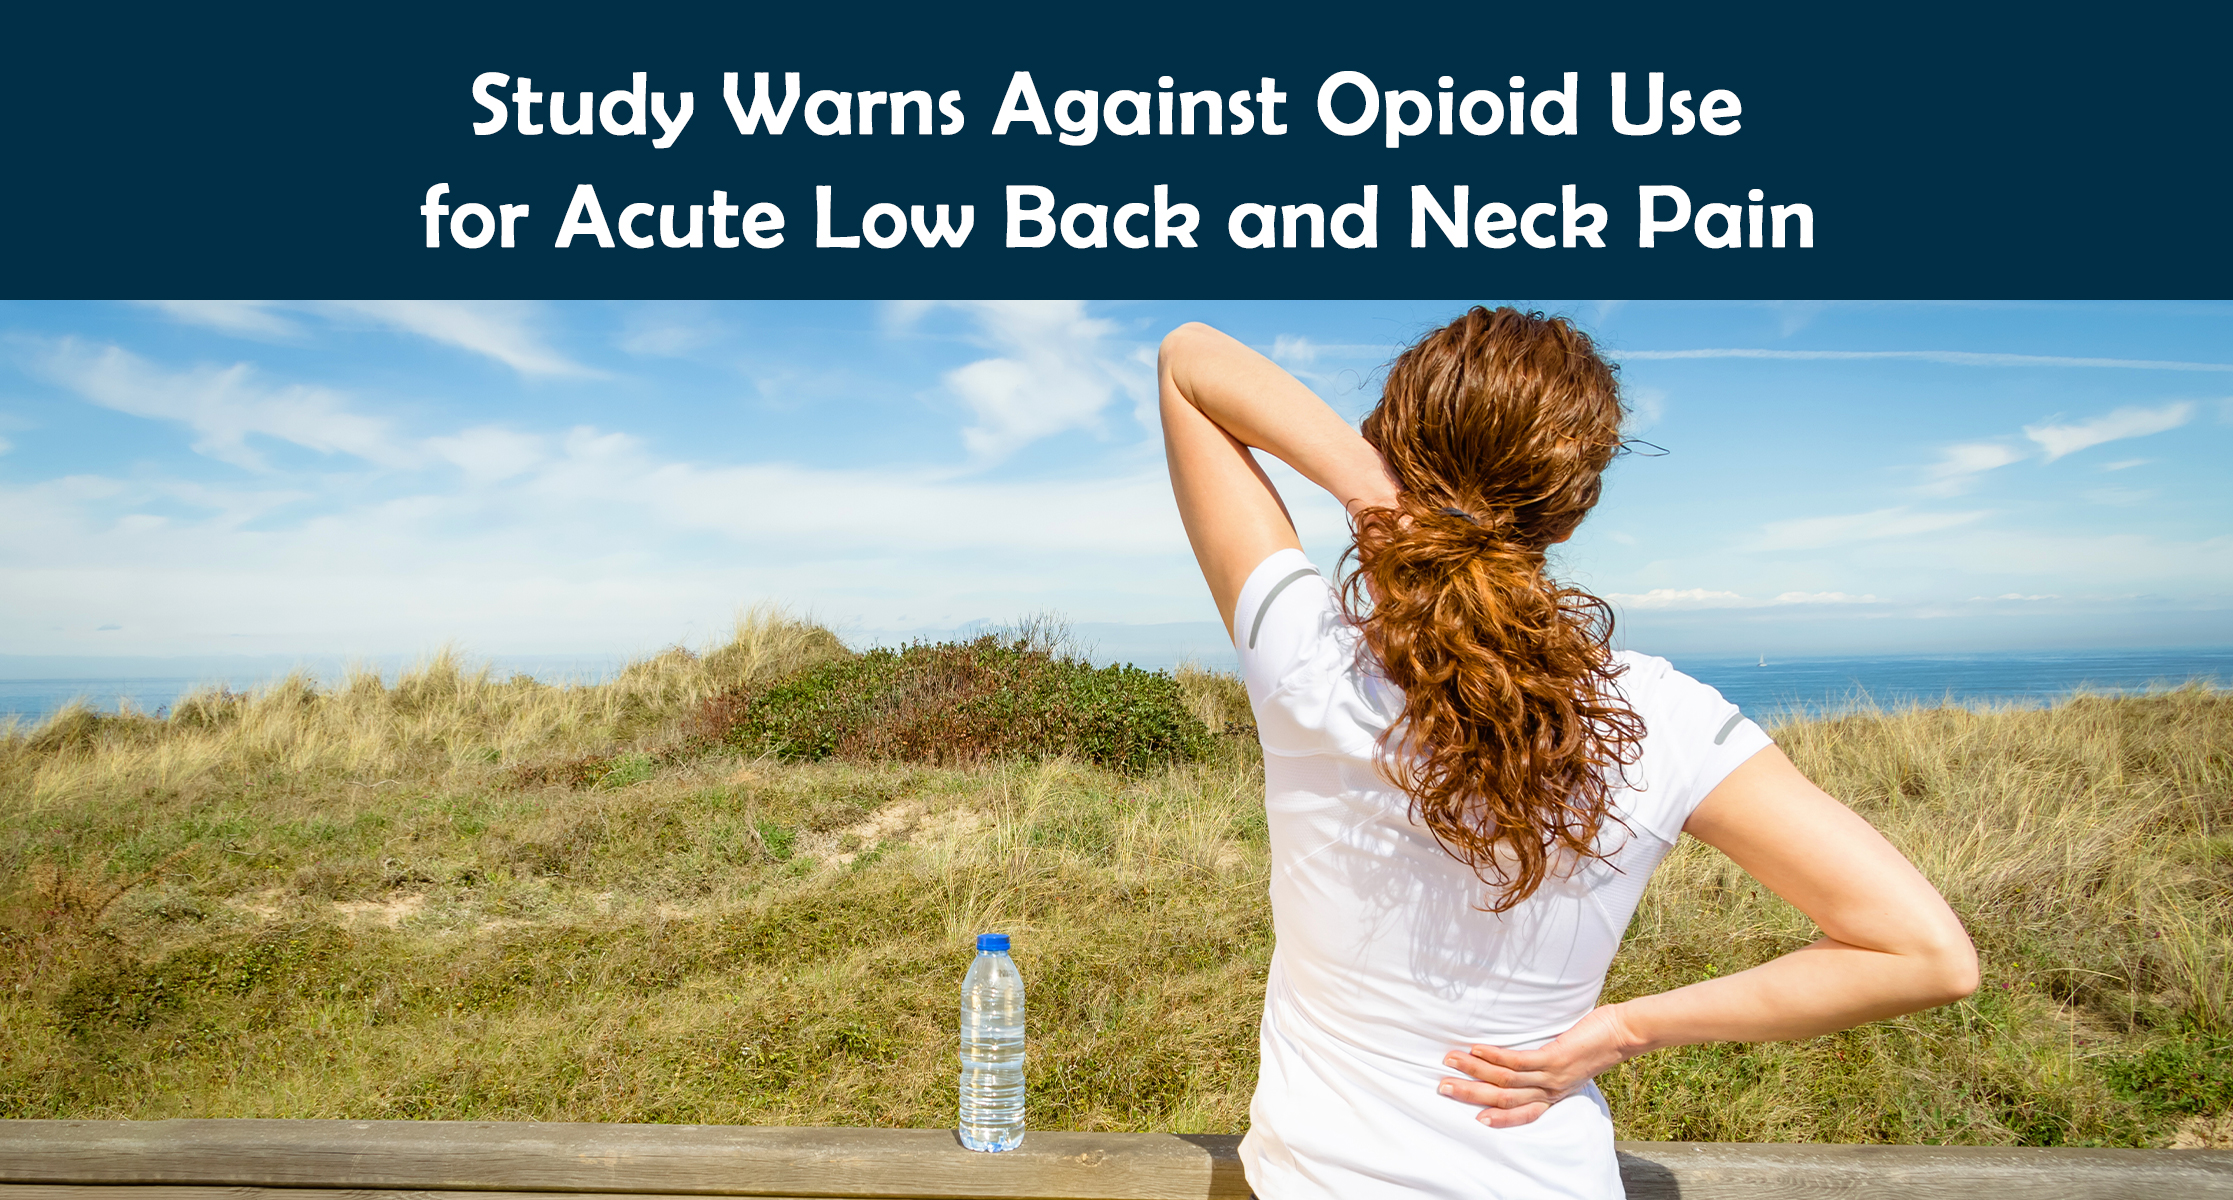 Study Warns Against Opioid Use for Acute Low Back and Neck Pain